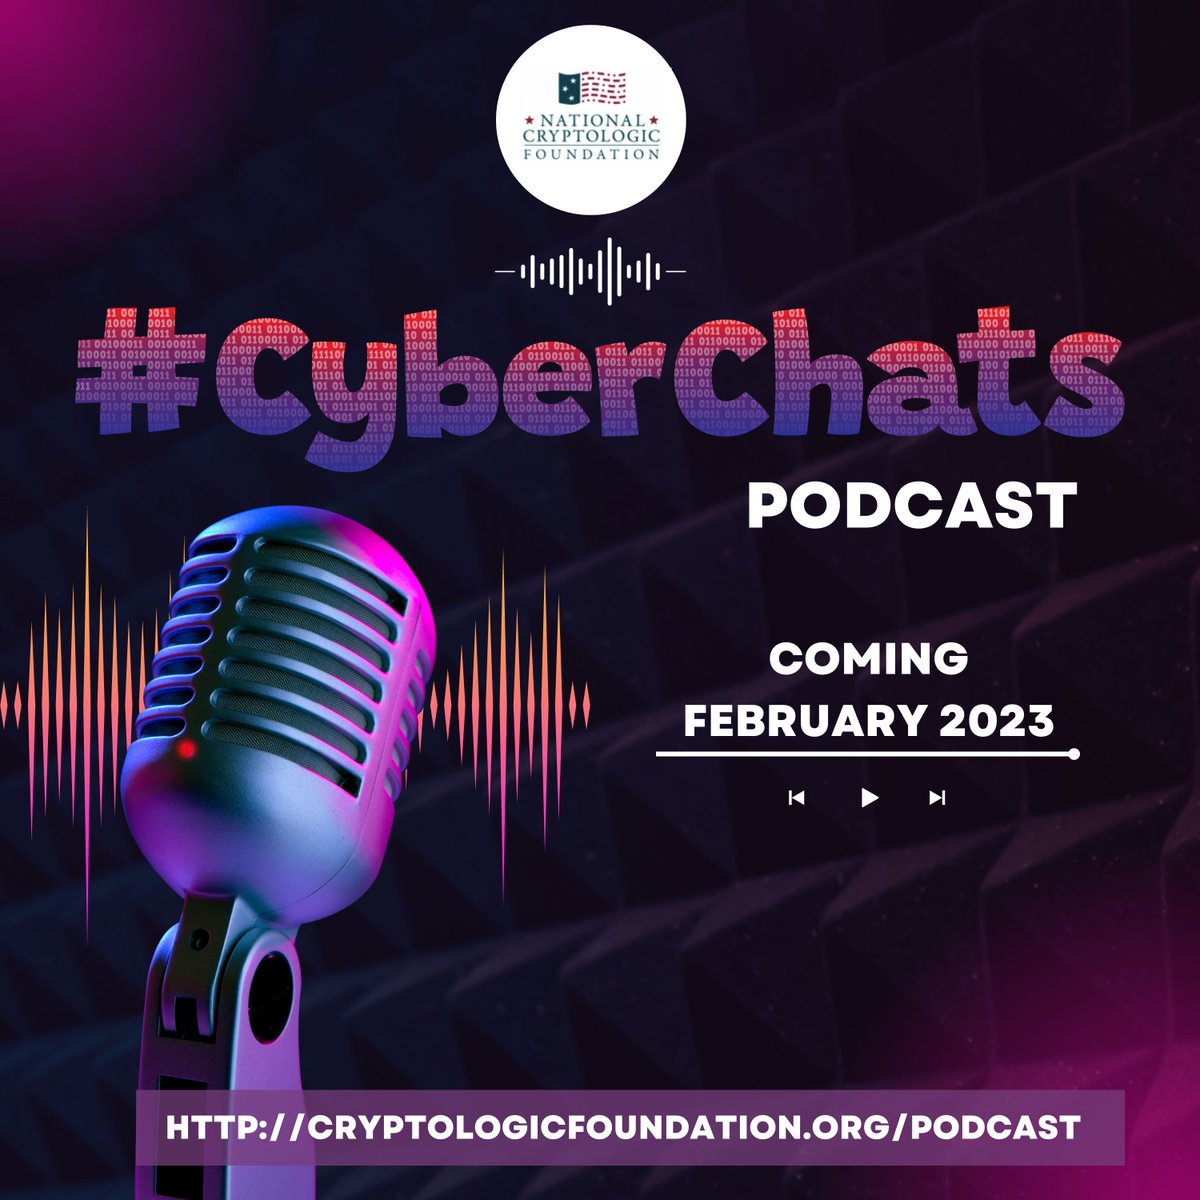 BIG Announcement to kick off the New Year: 
🚨🎙 We're launching our #CyberChats podcast in February. Learn what hackers and hijackers don't want you to know. cryptologicfoundation.org/podcast 
#cybersecurity #cyberpodcast #cybereducation #highschool #middleschool #studentpodcast